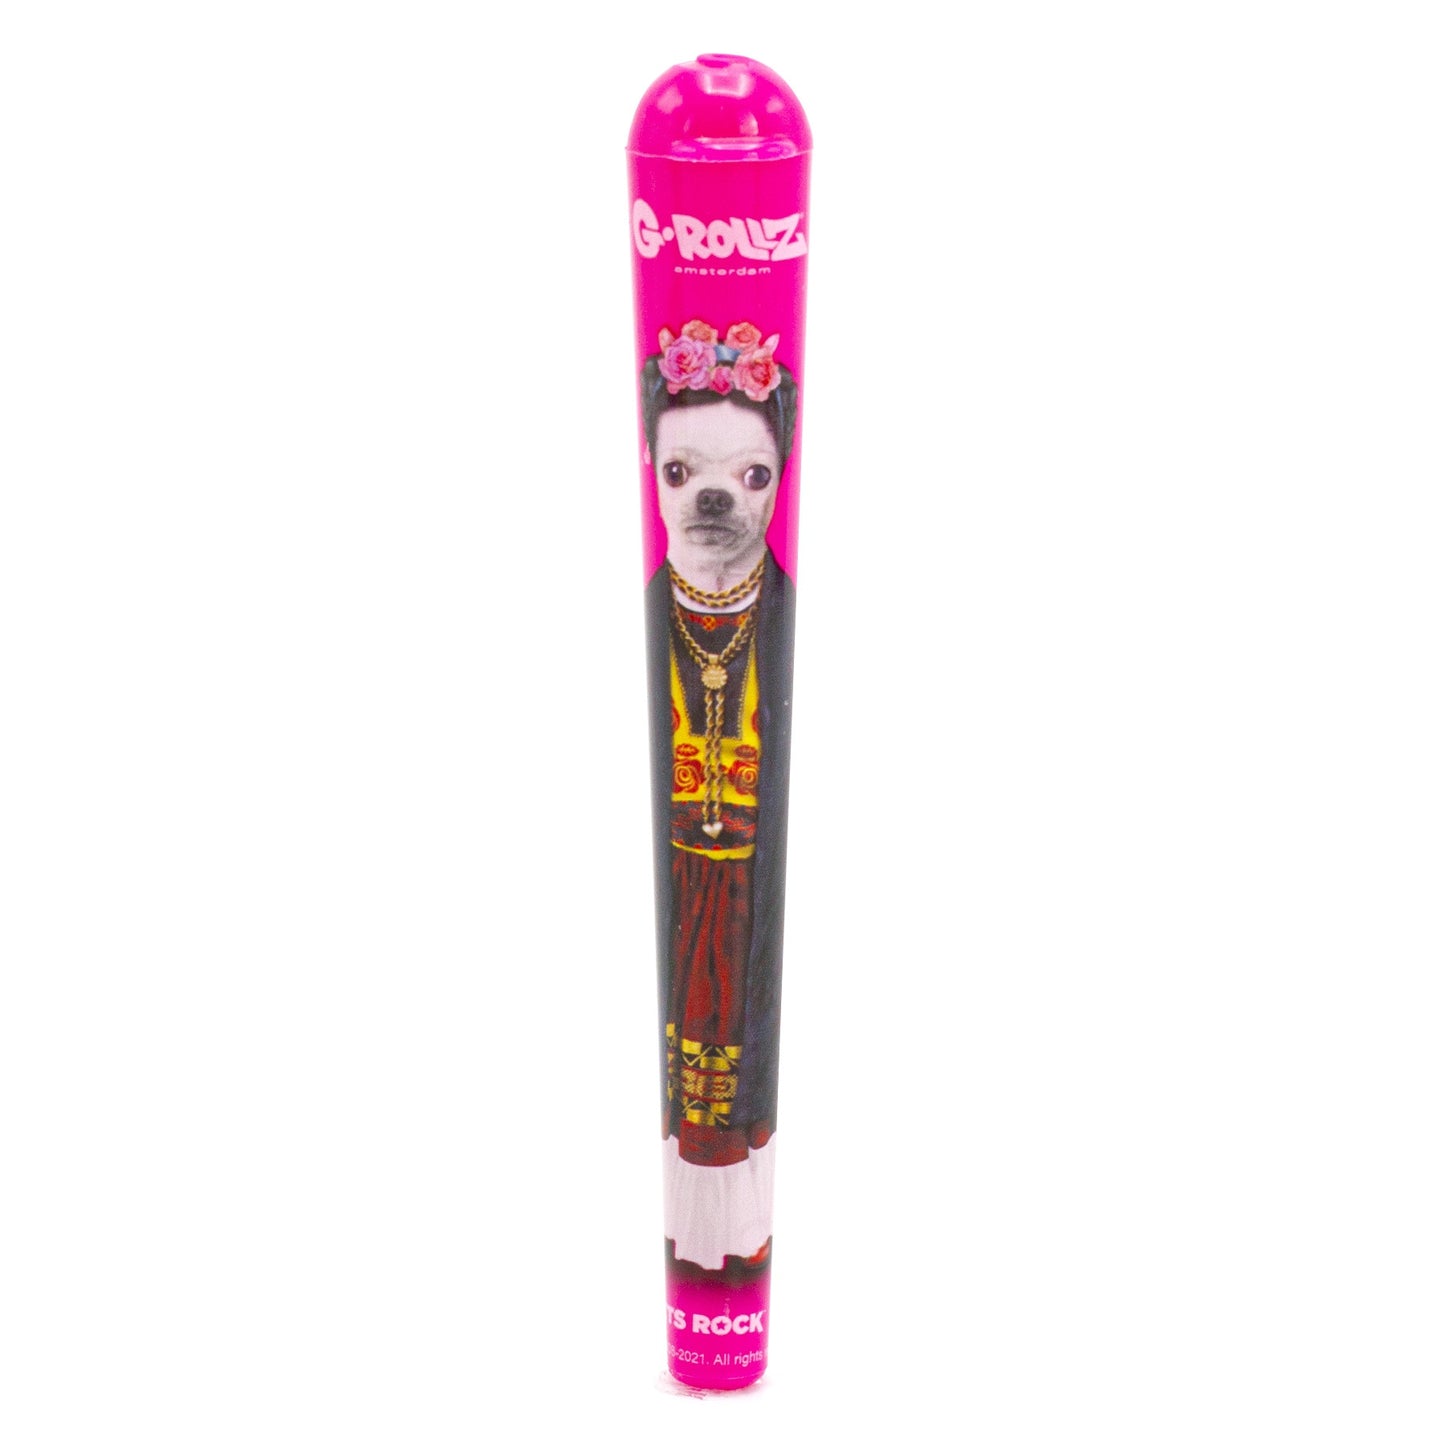 PETS ROCK DOOB TUBE KINGSIZE JOINT HOLDER "MEXICAN CHIHUAHUA" G-ROLLZ